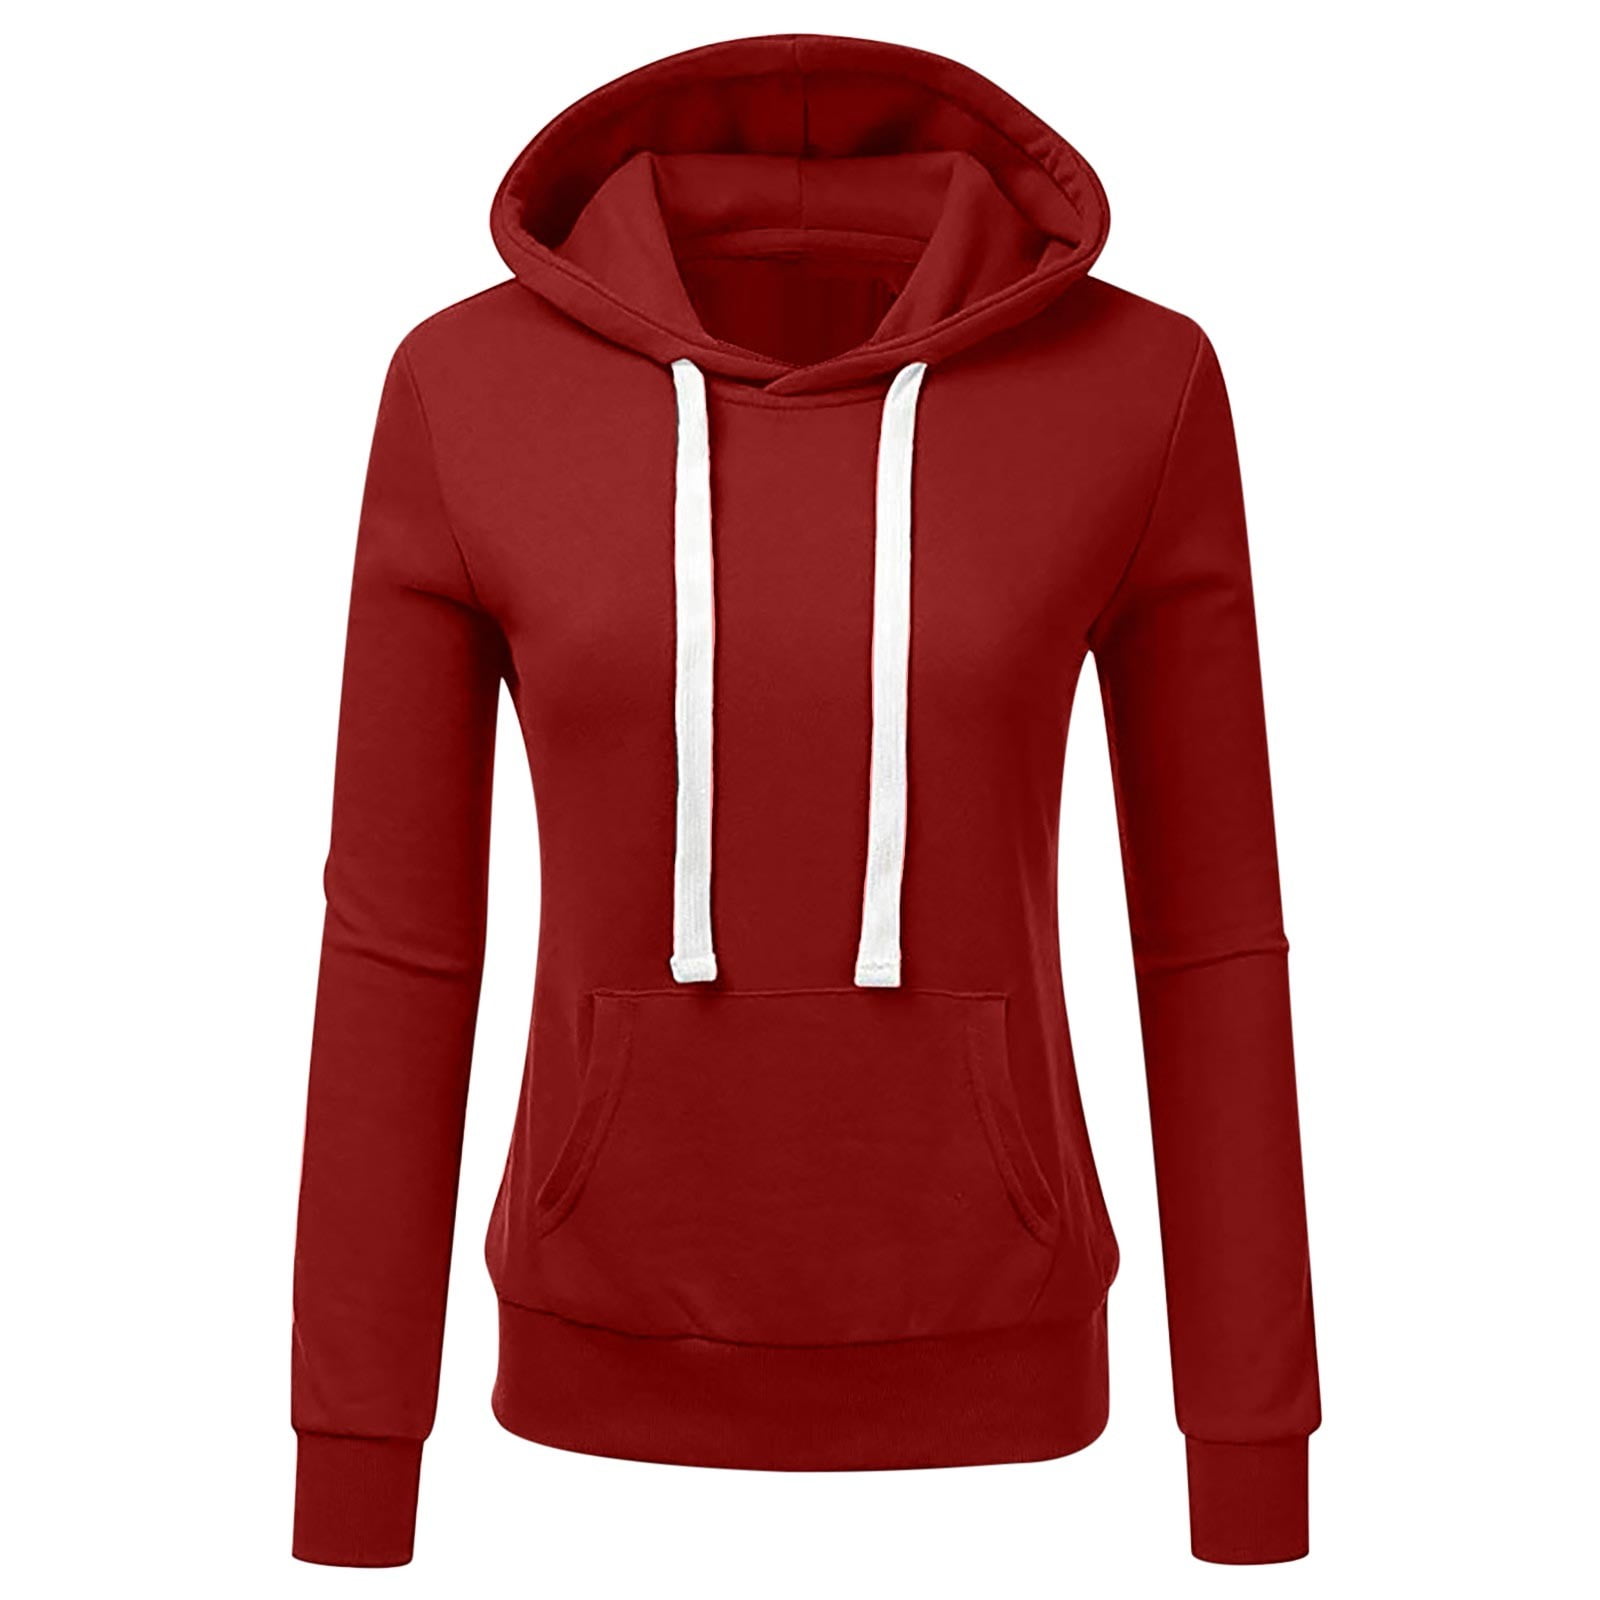 Black and Friday Deals Charella Women's Casual Hoodies Long Sleeve ...